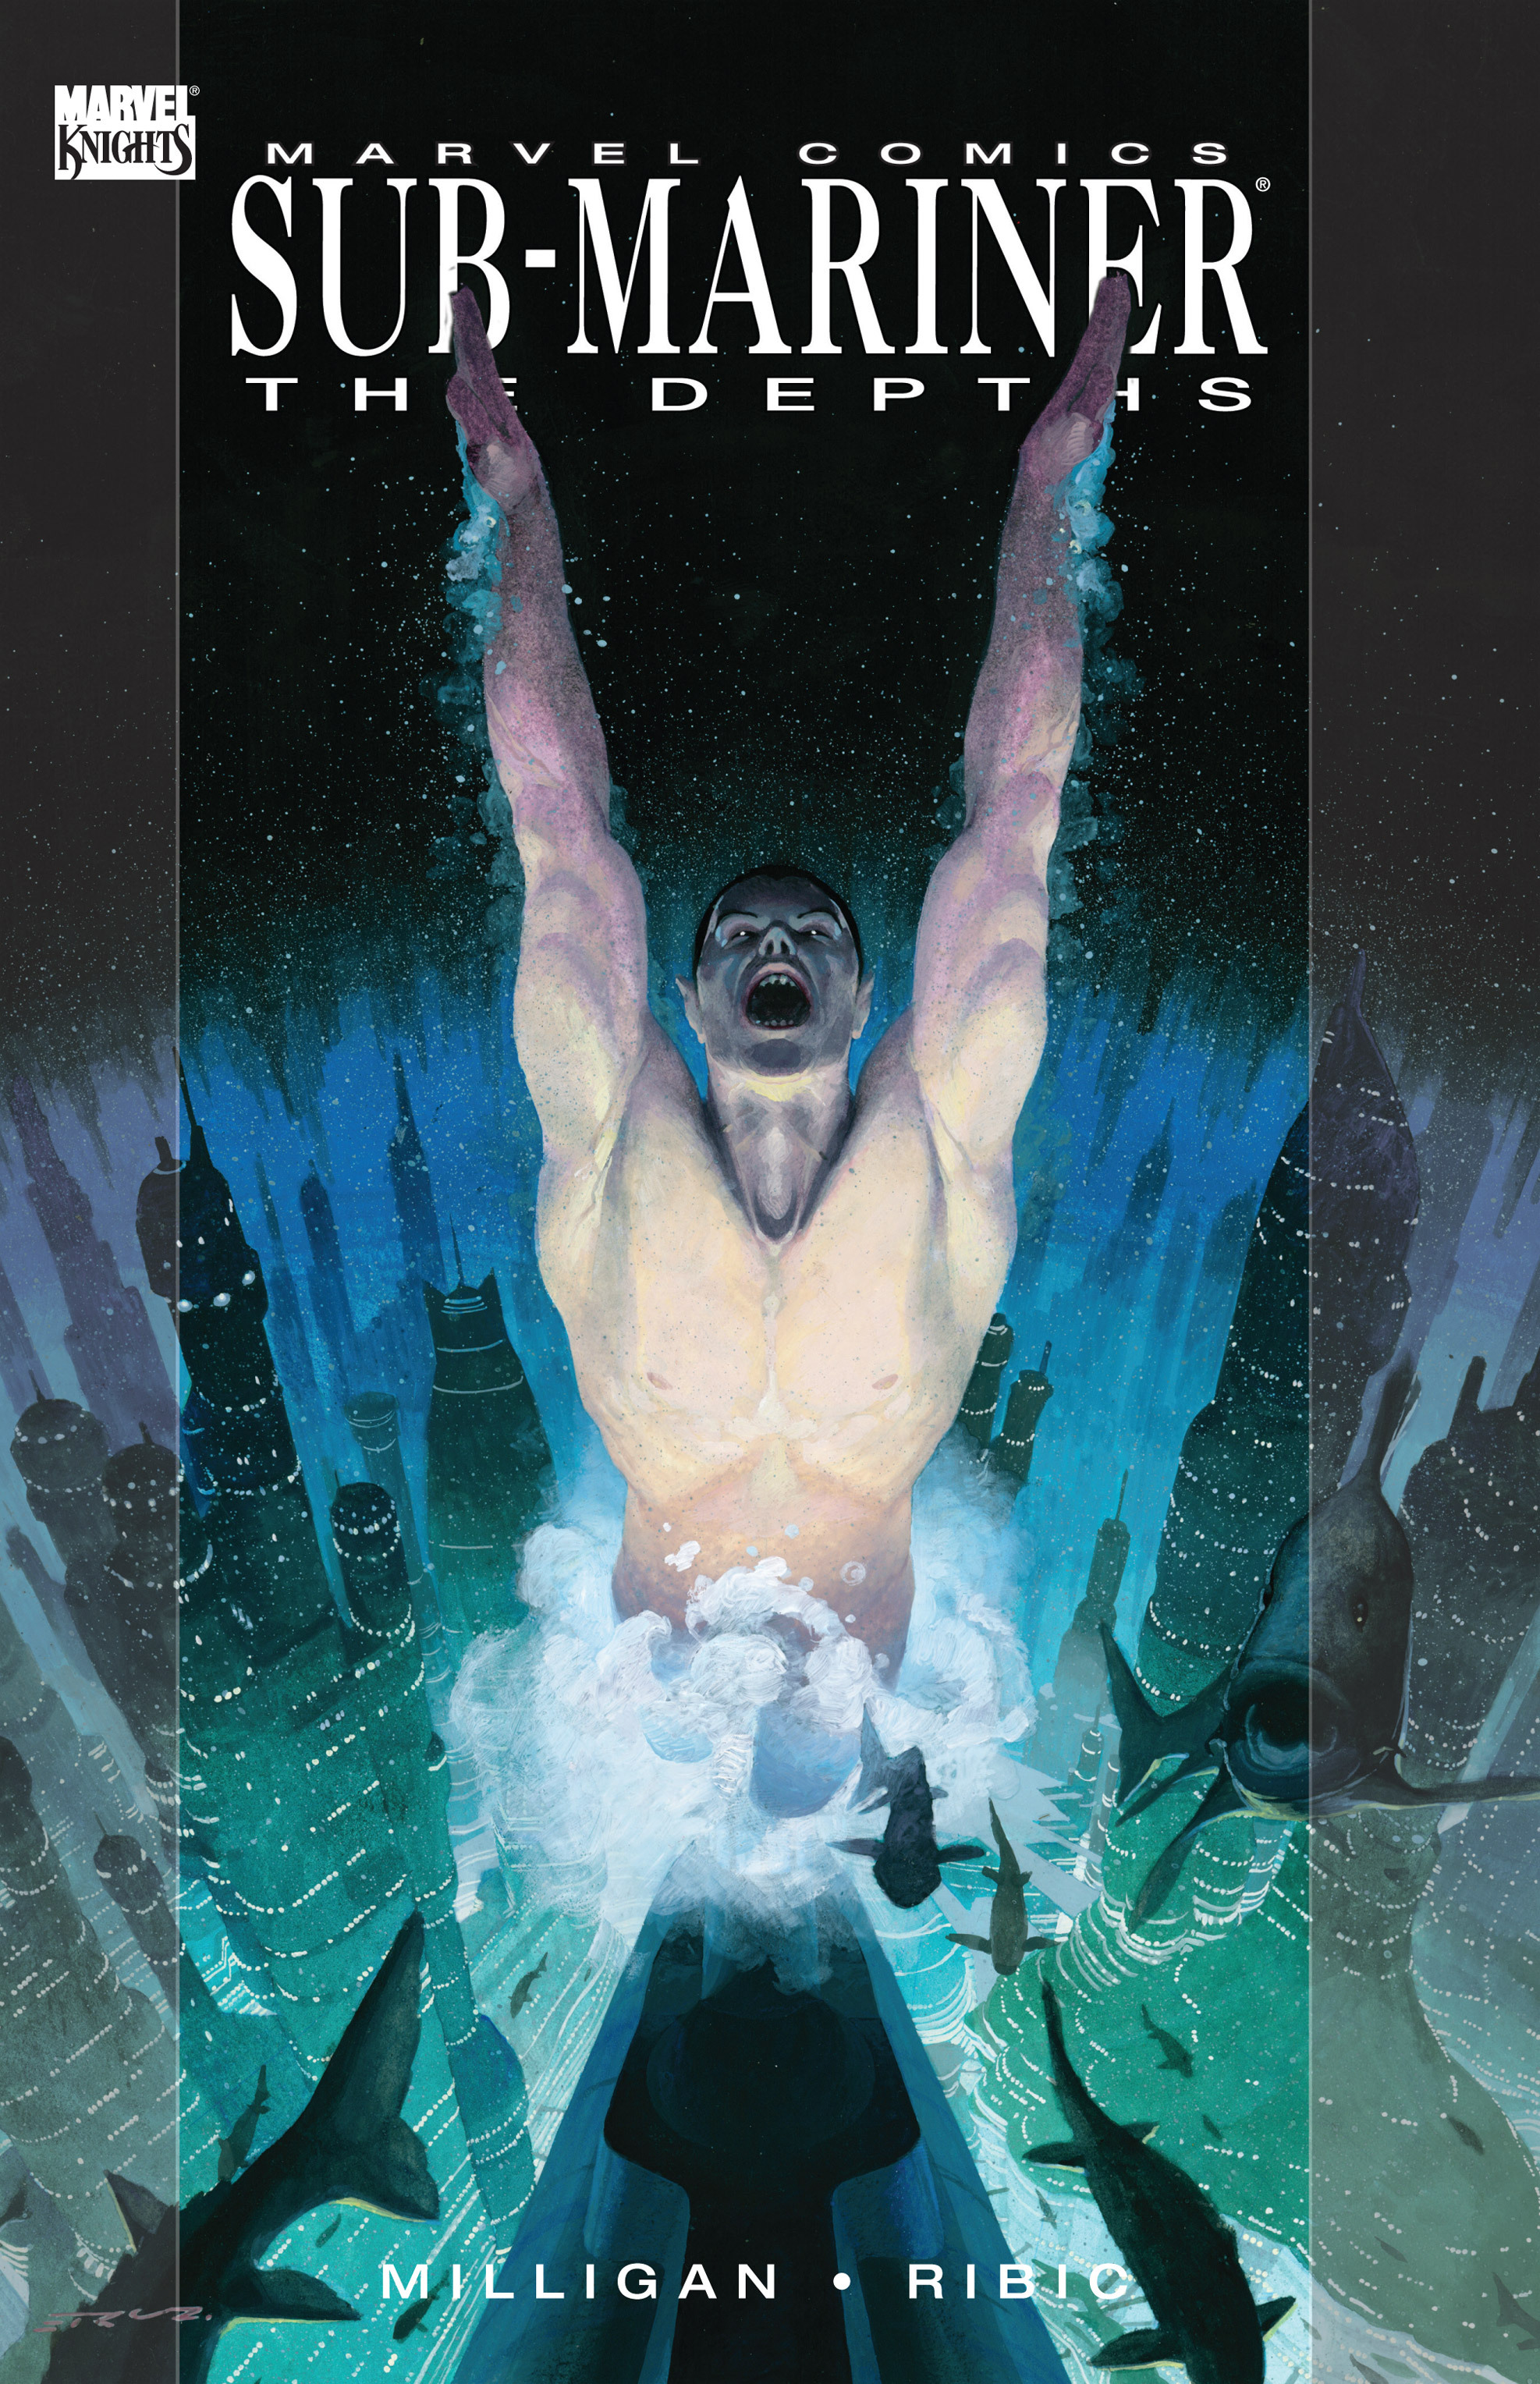 Read online Sub-Mariner: The Depths comic -  Issue # TPB - 1